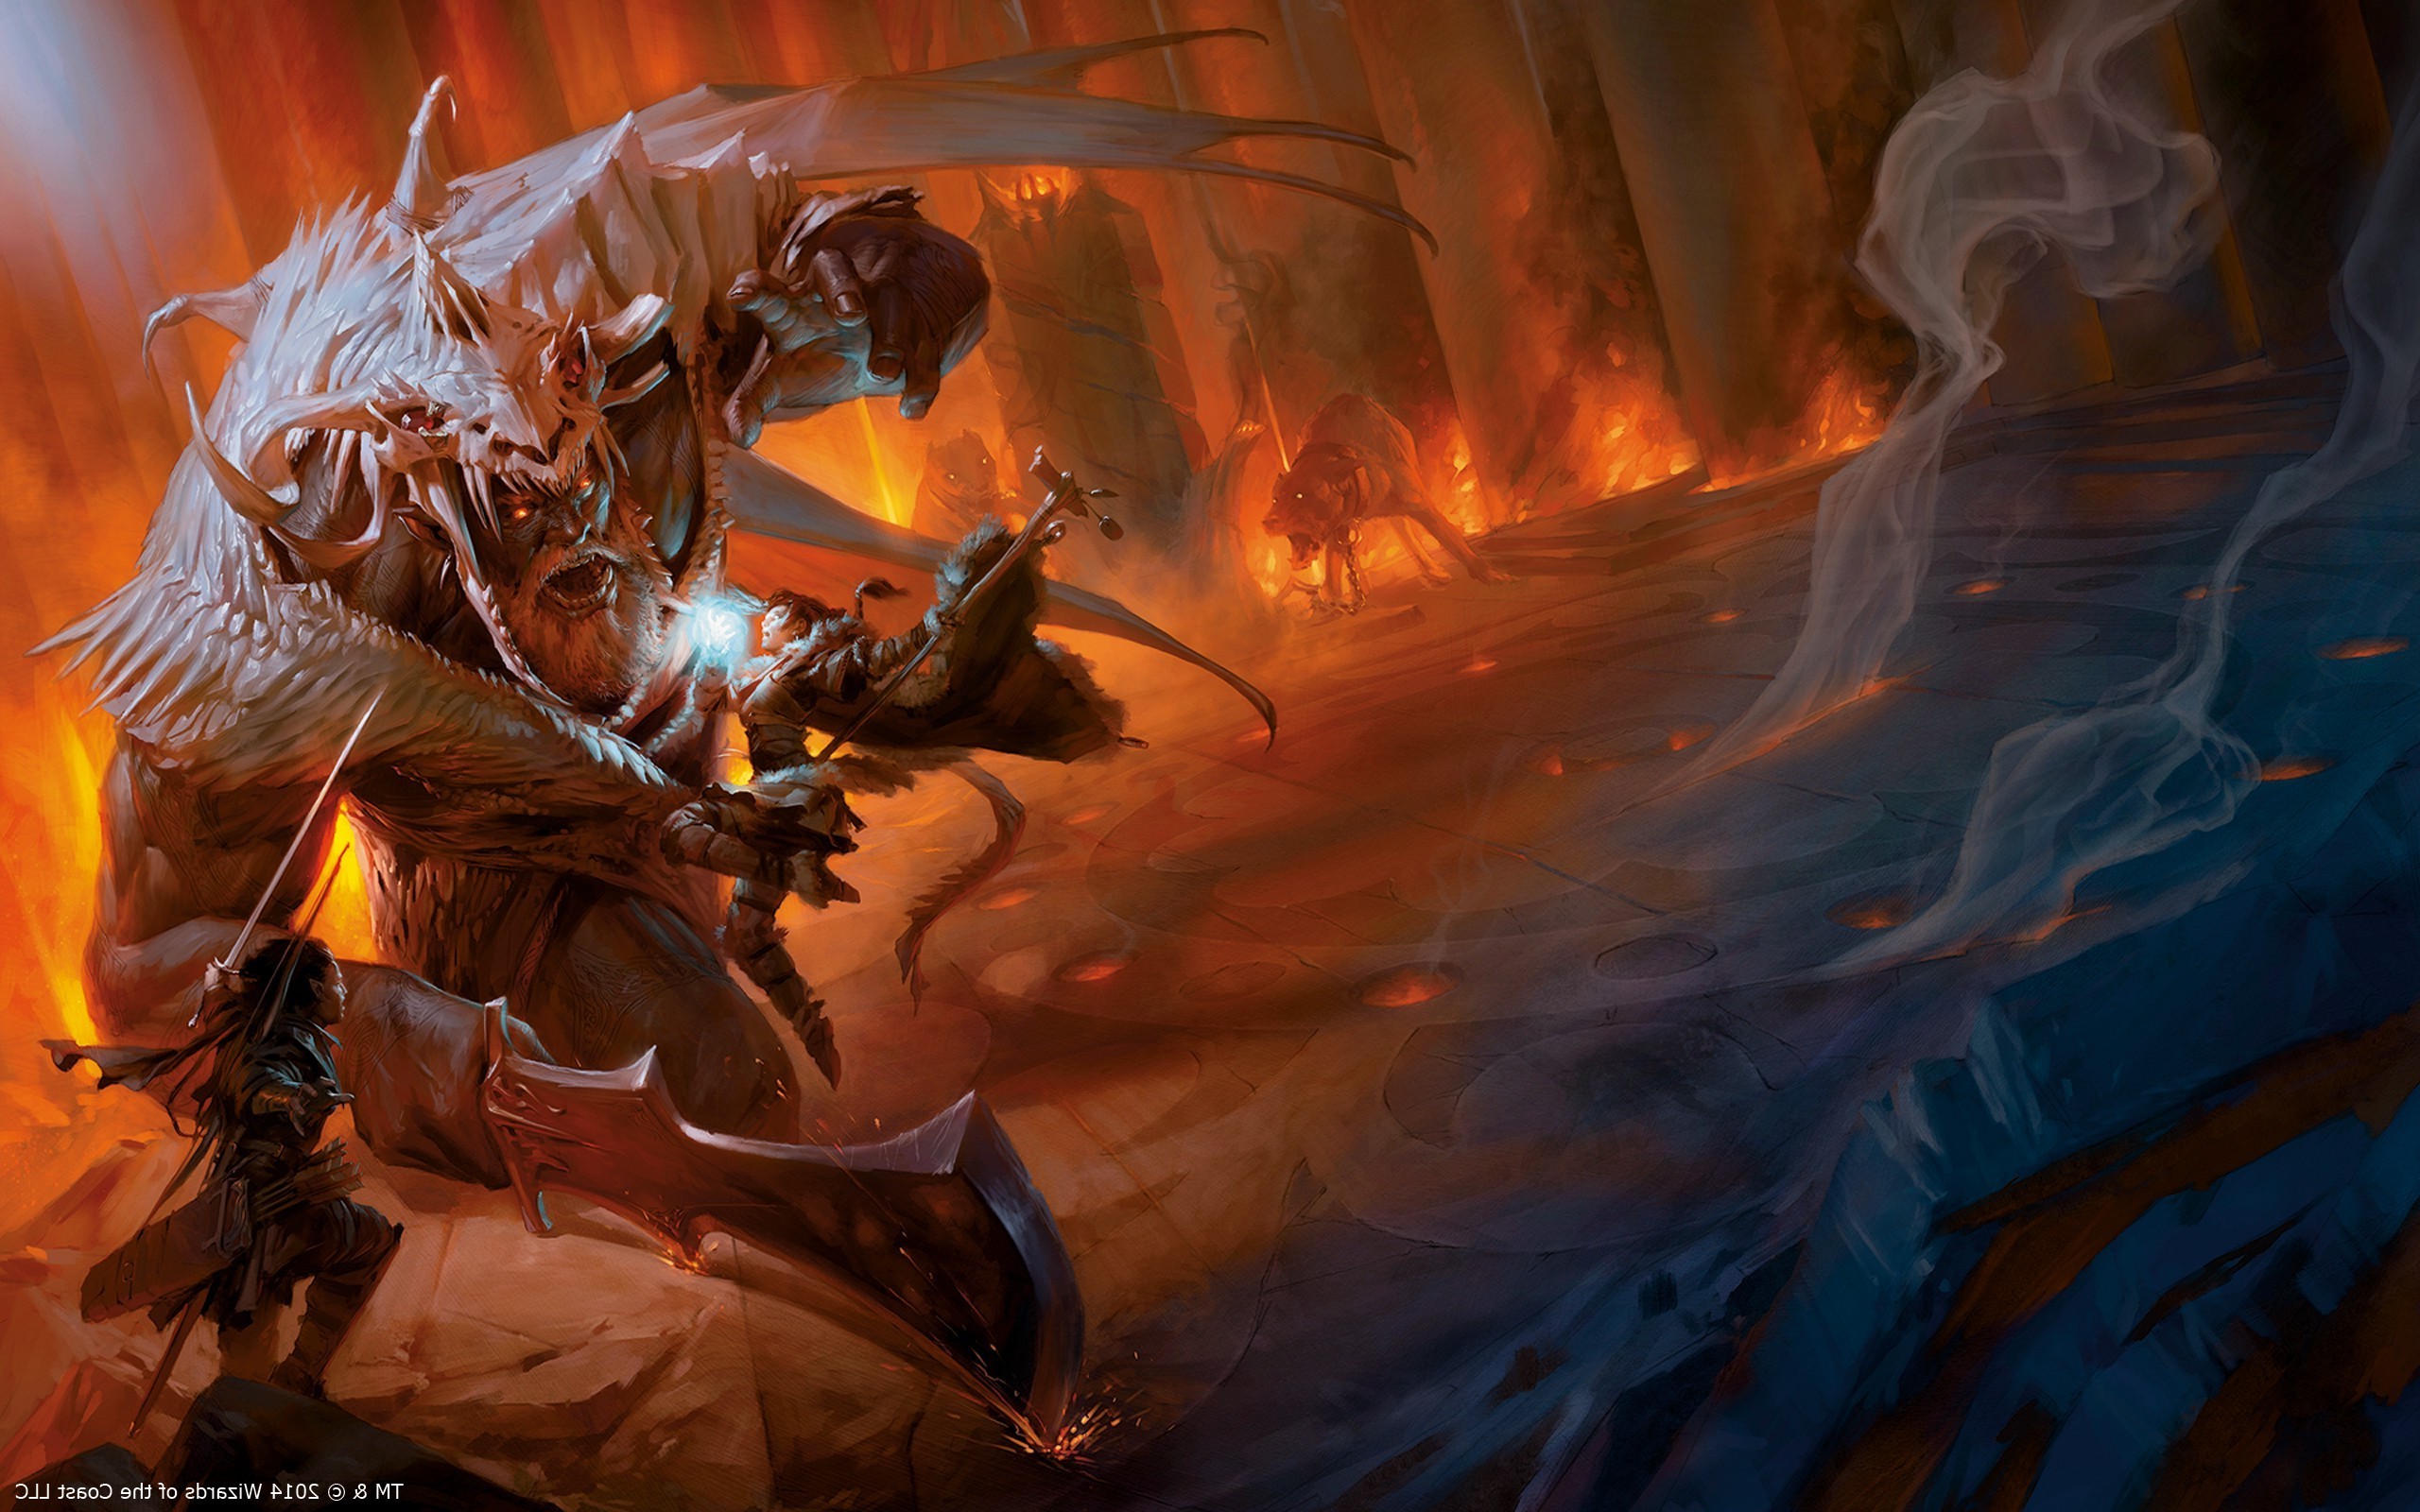 dnd wallpaper,action adventure game,pc game,cg artwork,flame,geological phenomenon